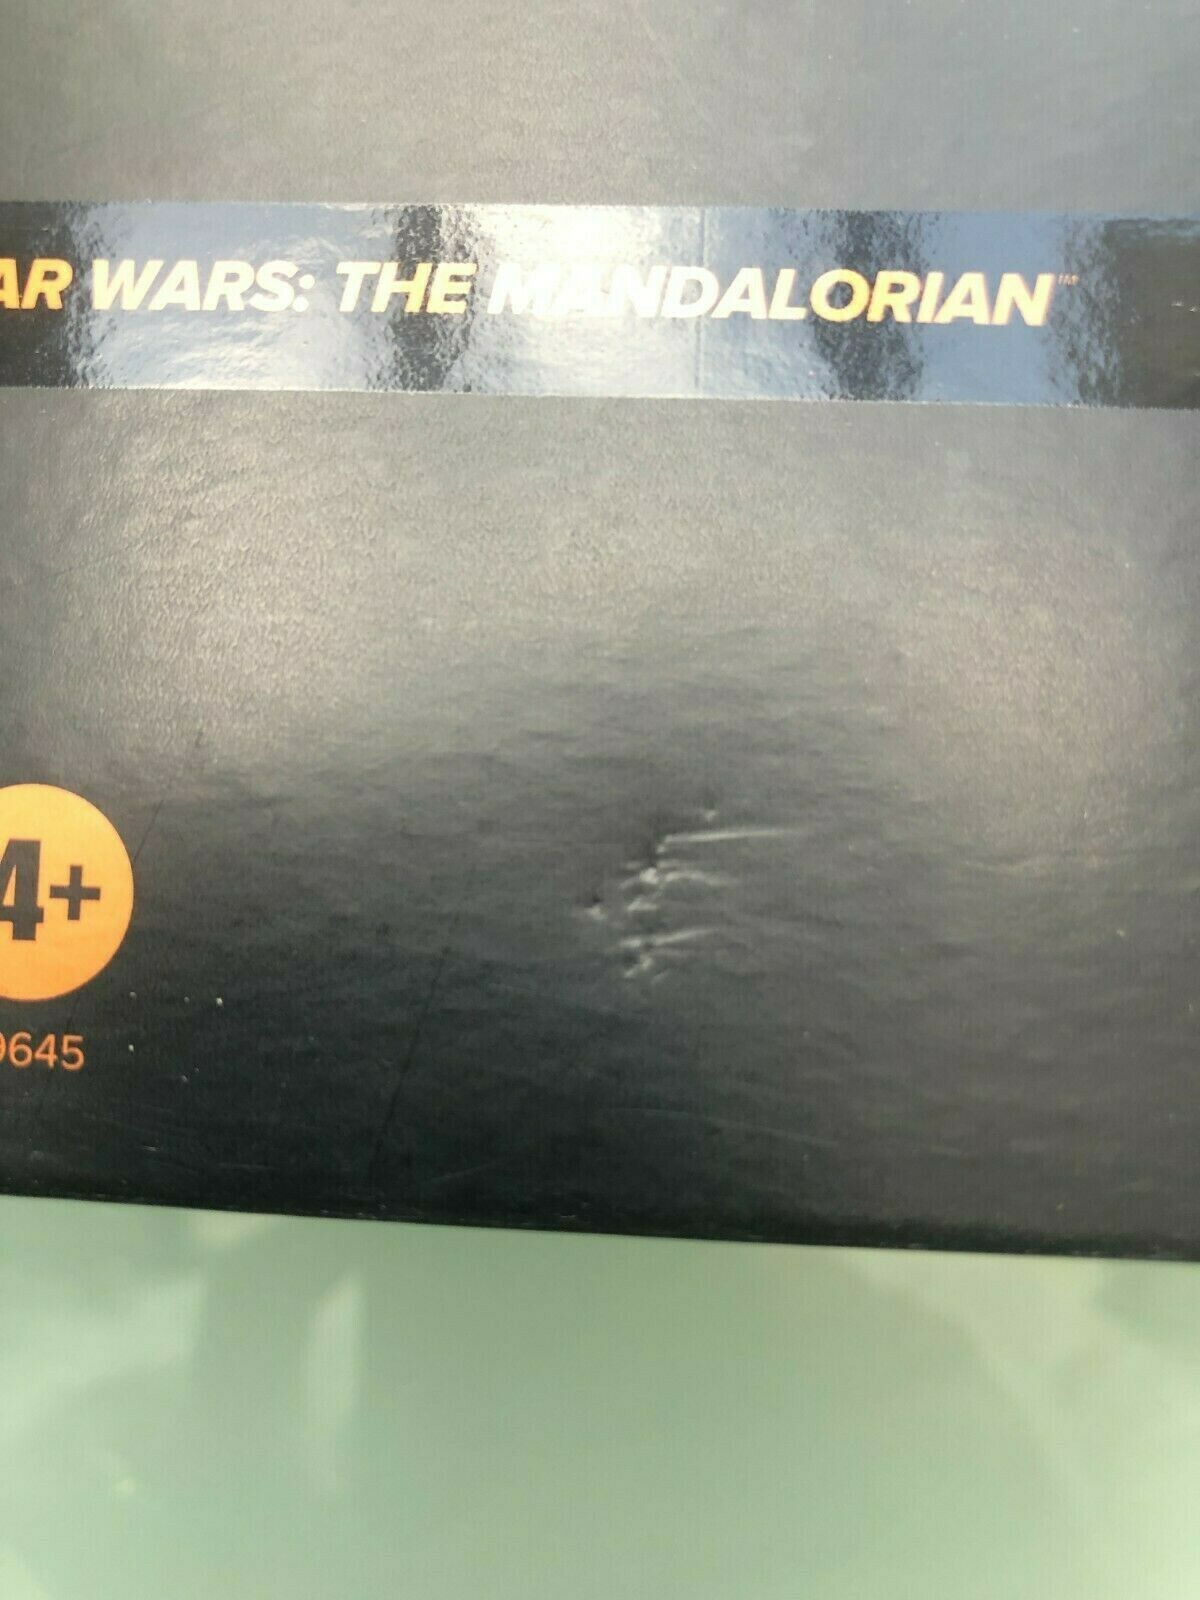 STAR WARS - The Black Series The Mandalorian - THE ARMORER EXCLUSIVE - Hasbro